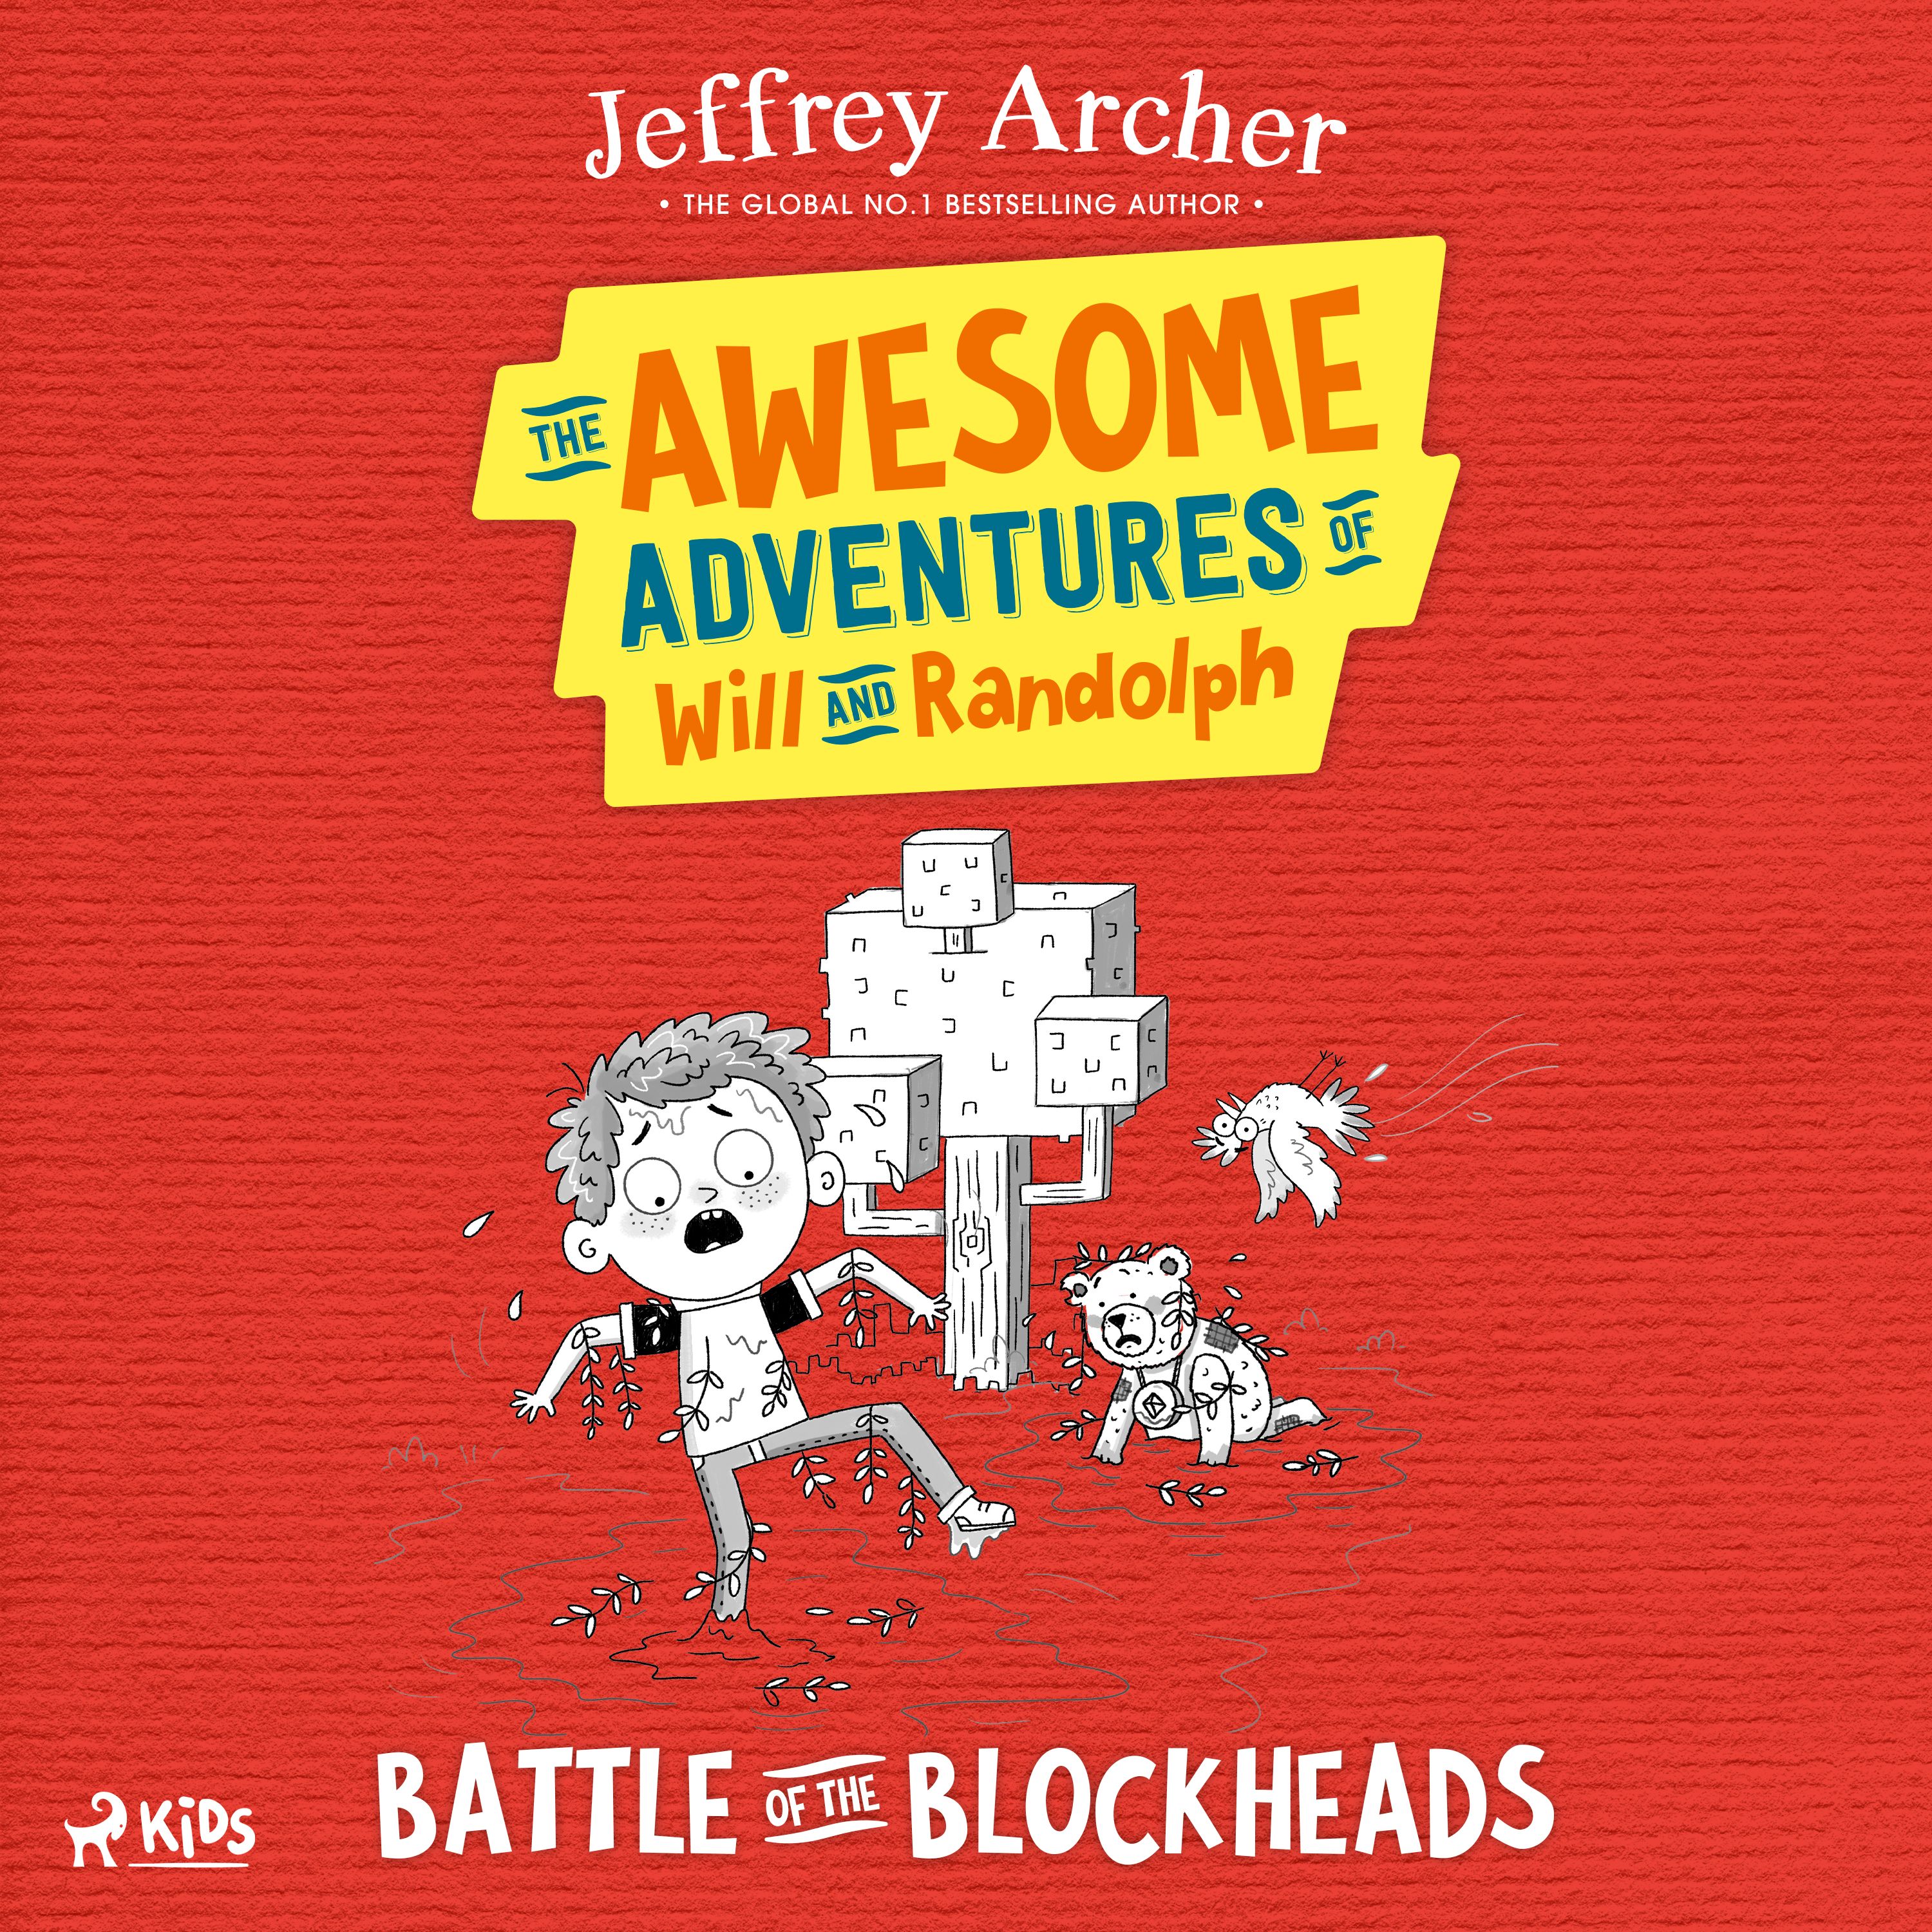 The Awesome Adventures of Will and Randolph: Battle of the Blockheads, audiobook by Jeffrey Archer